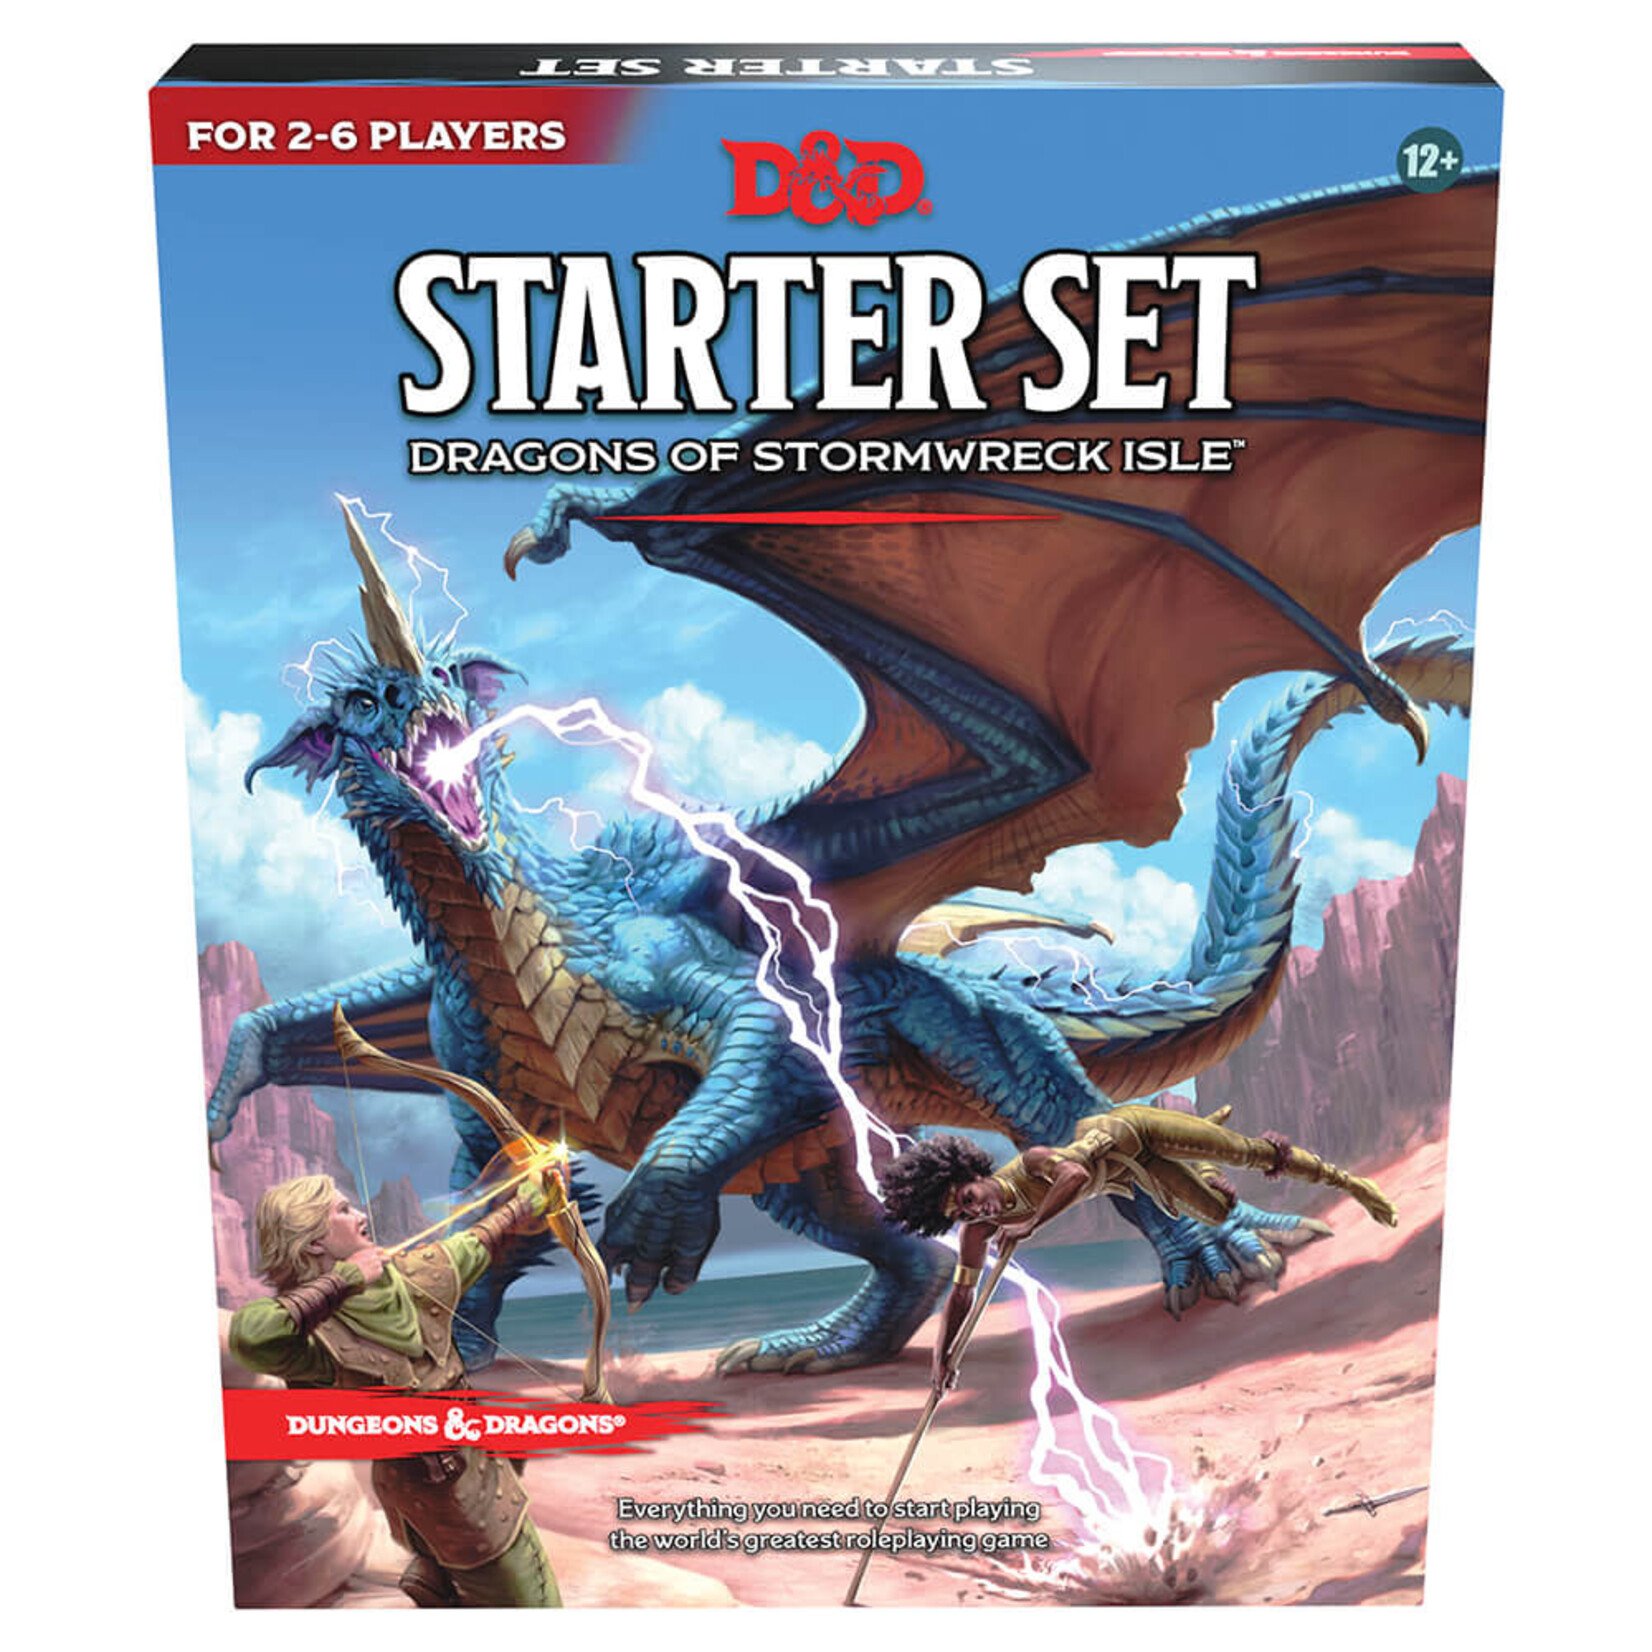 Wizards of the Coast Dungeons and Dragons 5th Edition: Revised Starter Set - Dragons of Stormwreck Isle